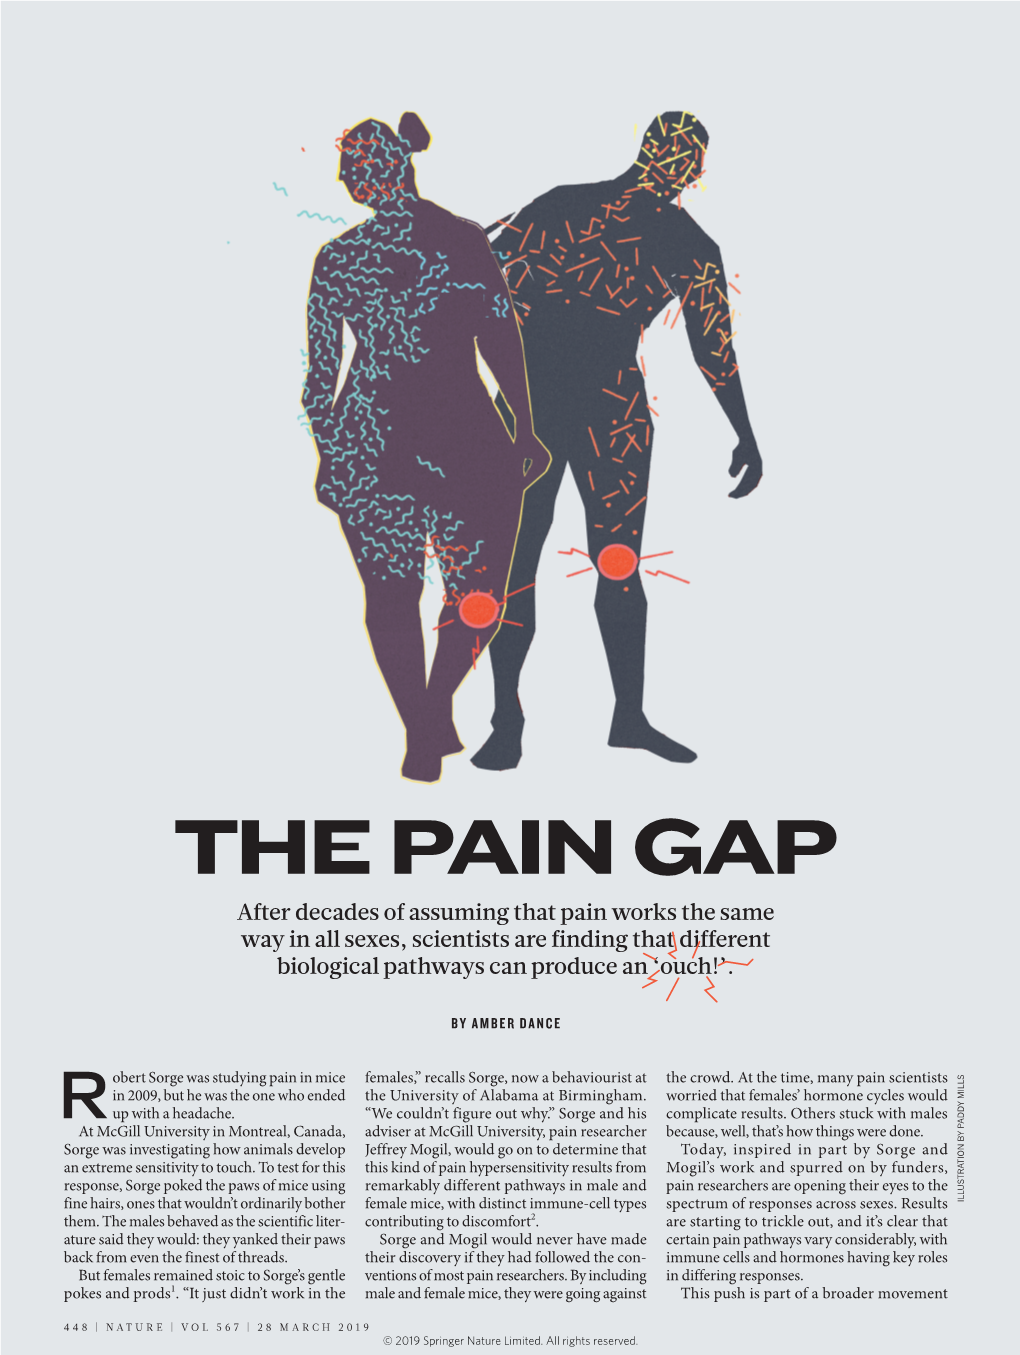 THE PAIN GAP After Decades of Assuming That Pain Works the Same Way in All Sexes, Scientists Are Finding That Different Biological Pathways Can Produce an ‘Ouch!’